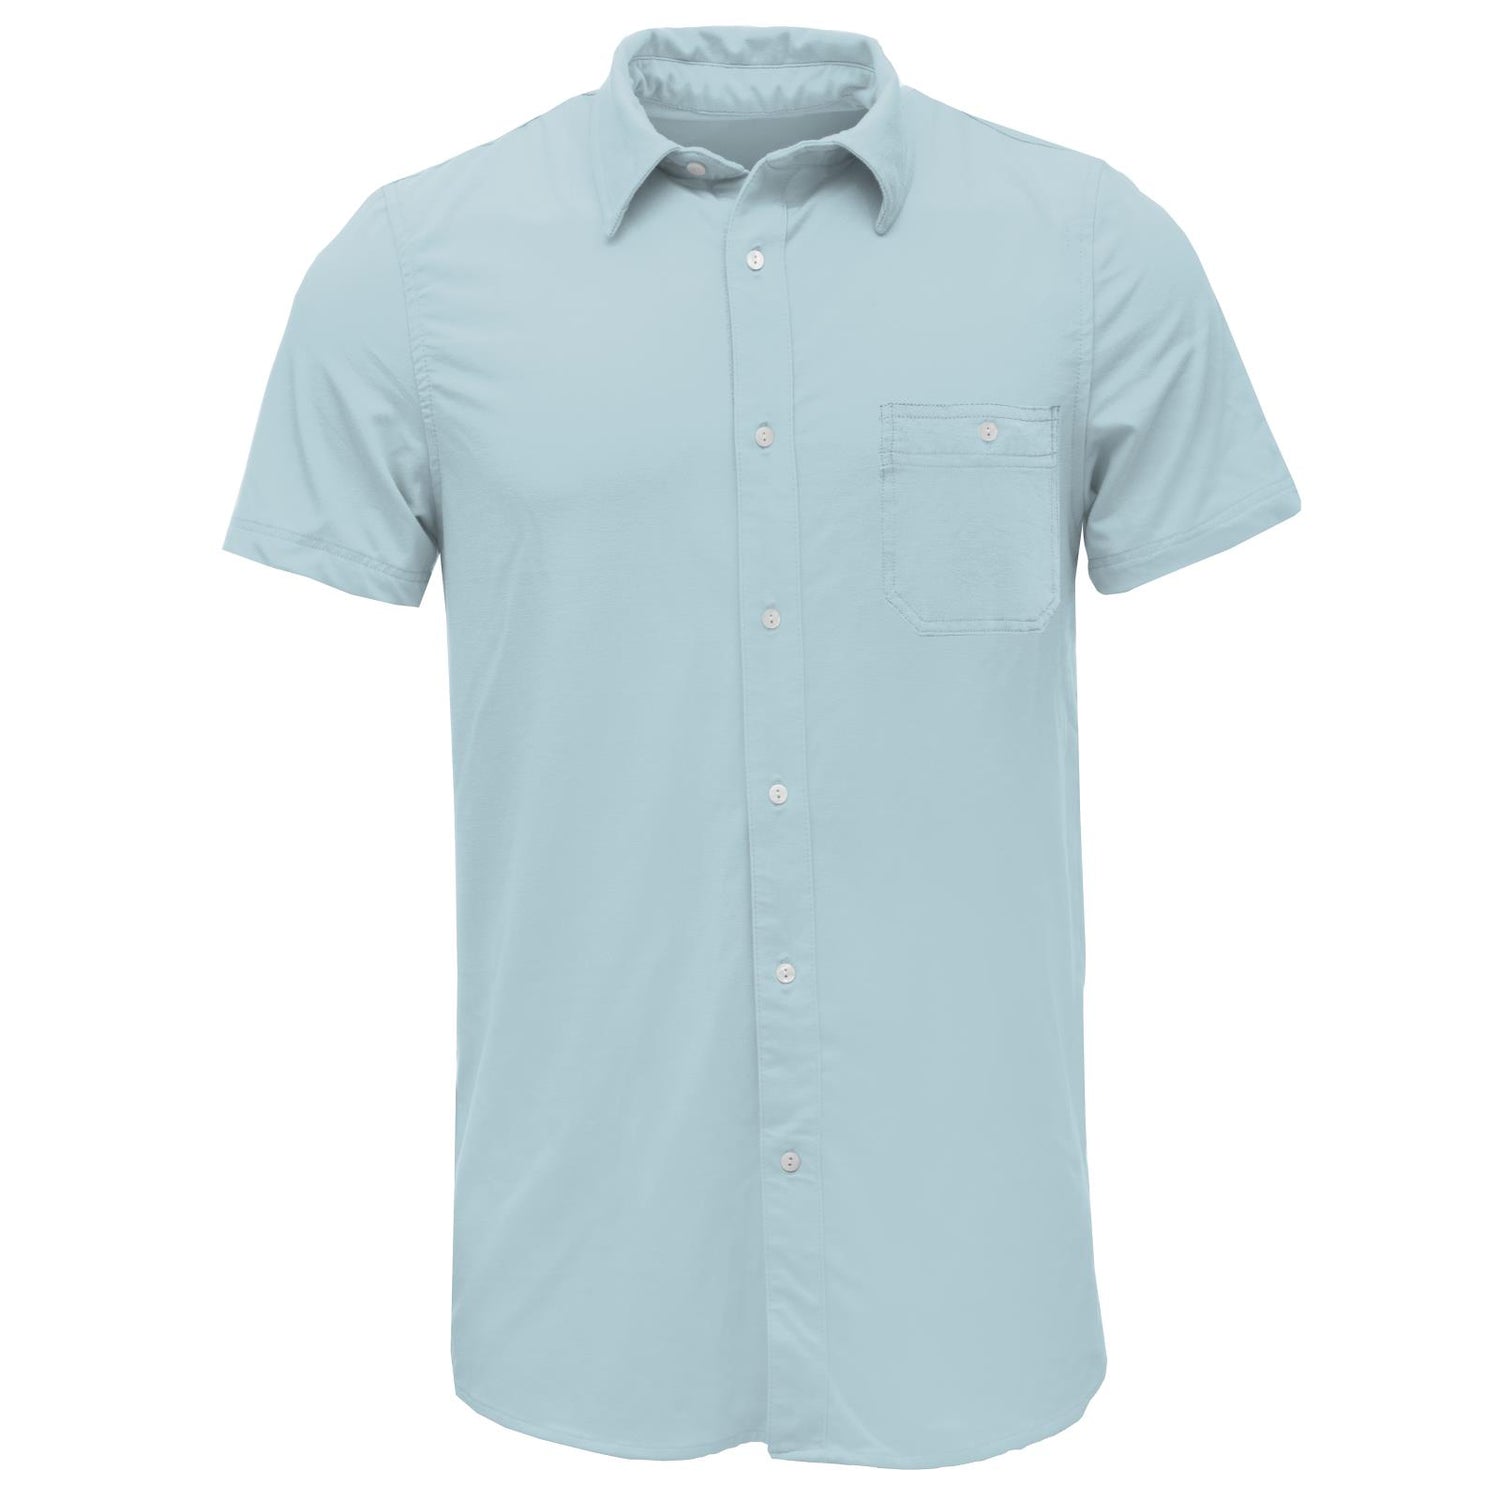 Men's Short Sleeve Woven Button Down Shirt with Pocket in Spring Sky